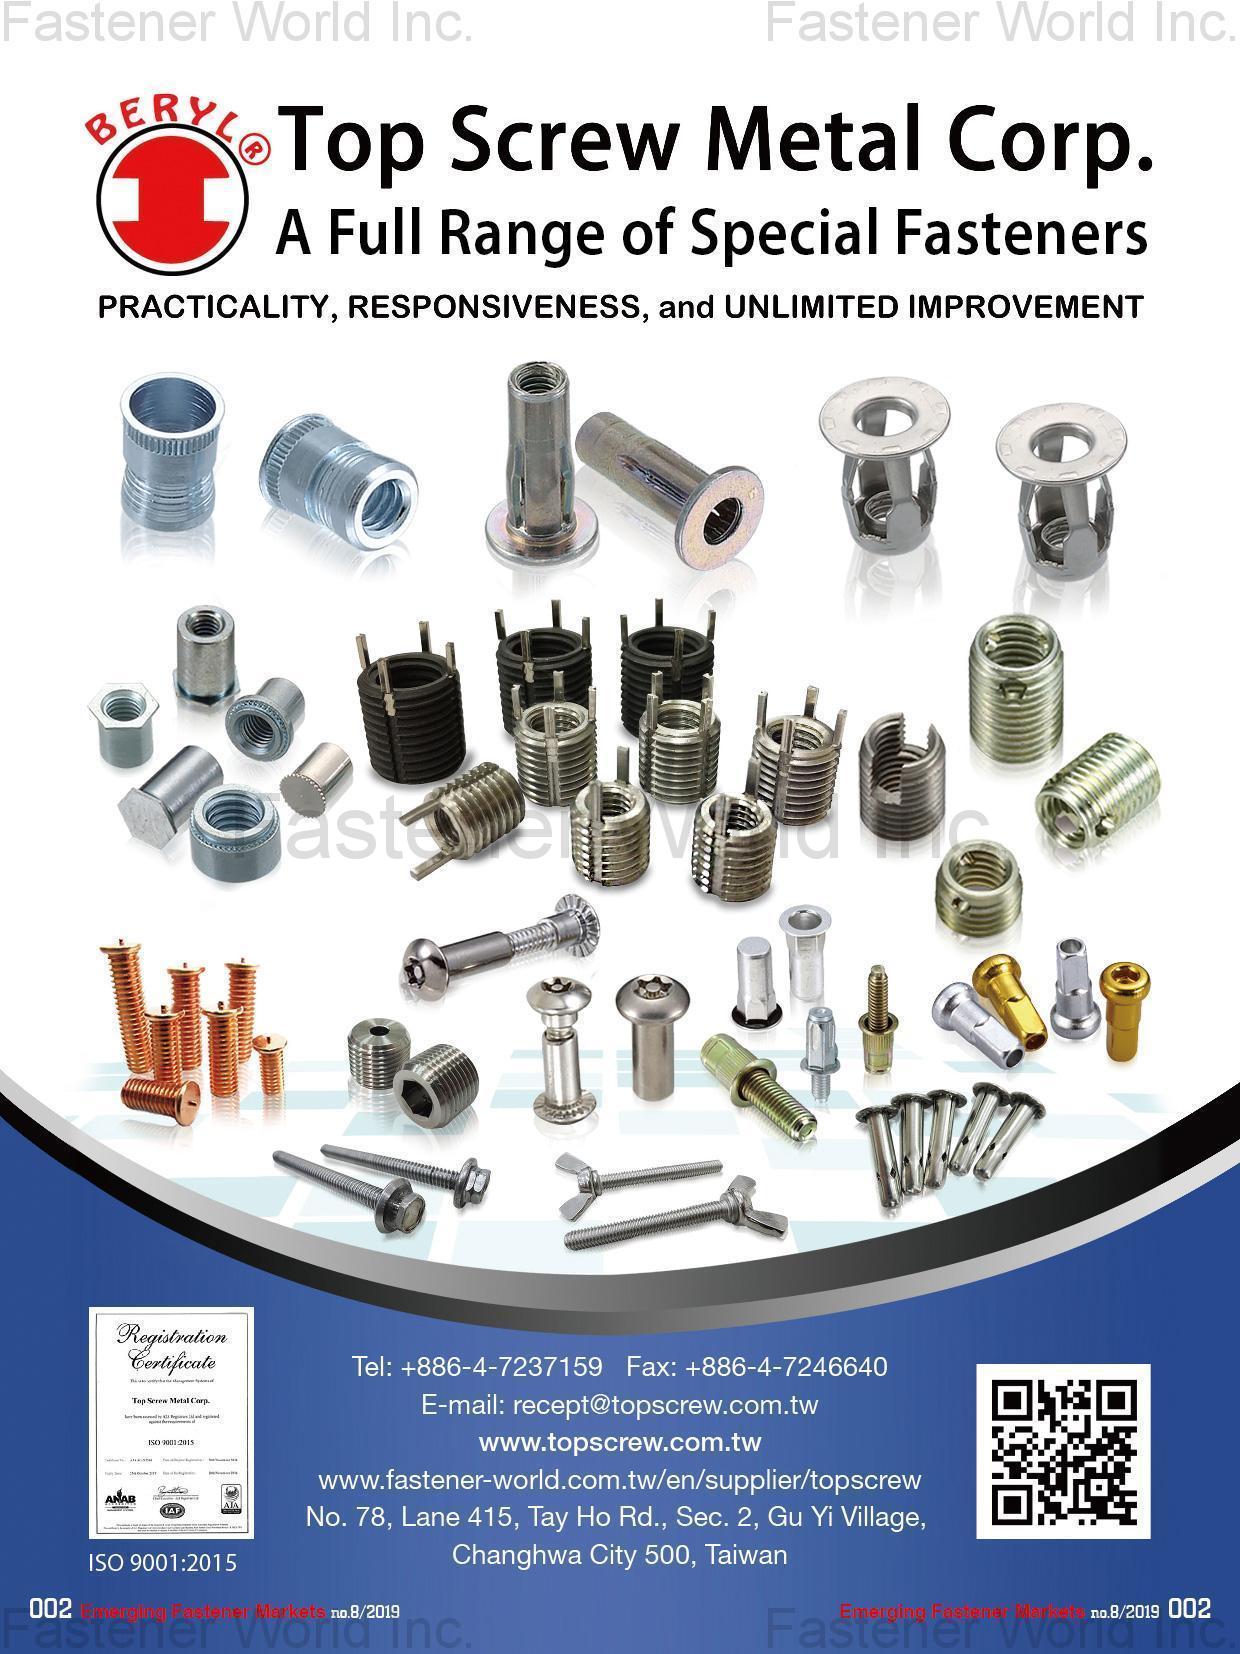 TOP SCREW METAL CORP.  , Inserts / Rivet Nuts / Jack Nuts / Blind Rivets / Pin Rivets / Bolts / Self-clinching Fasteners / Barrel Nuts / Grooved Pins , Special Parts